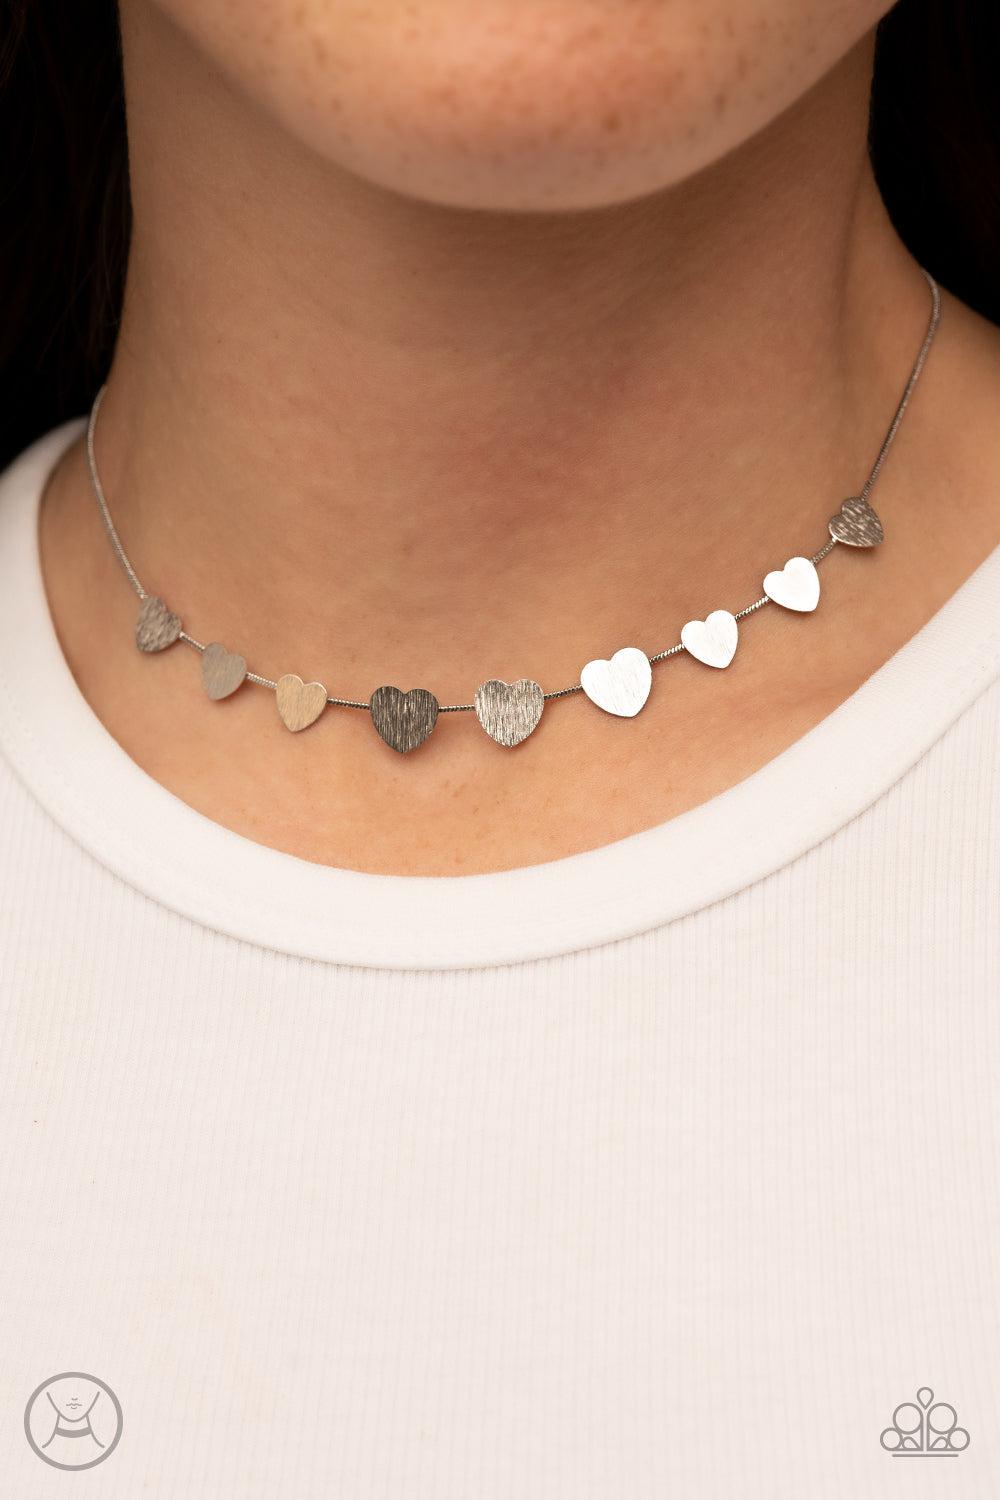 Dainty Desire Silver Heart Choker Necklace - Paparazzi Accessories- on model - CarasShop.com - $5 Jewelry by Cara Jewels